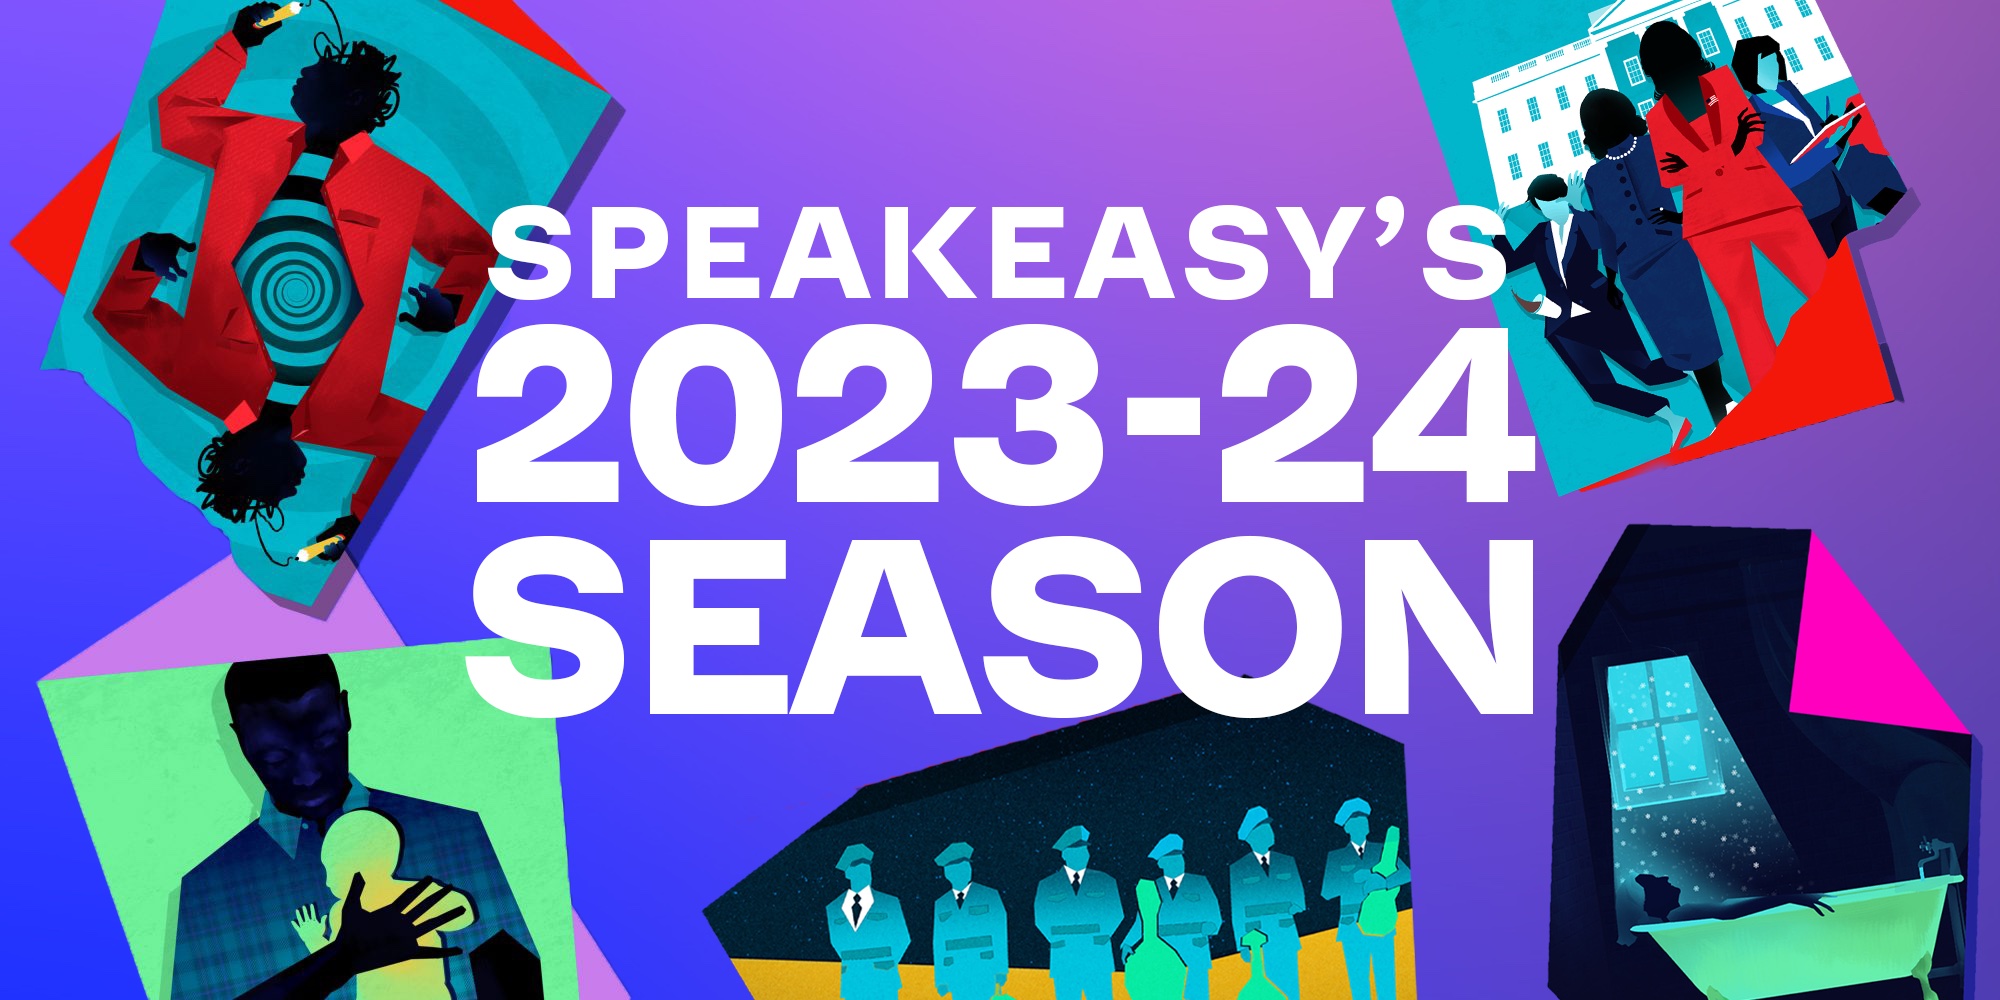 Join The Speakeasy Stage for Season 33 (2023 - 2024)